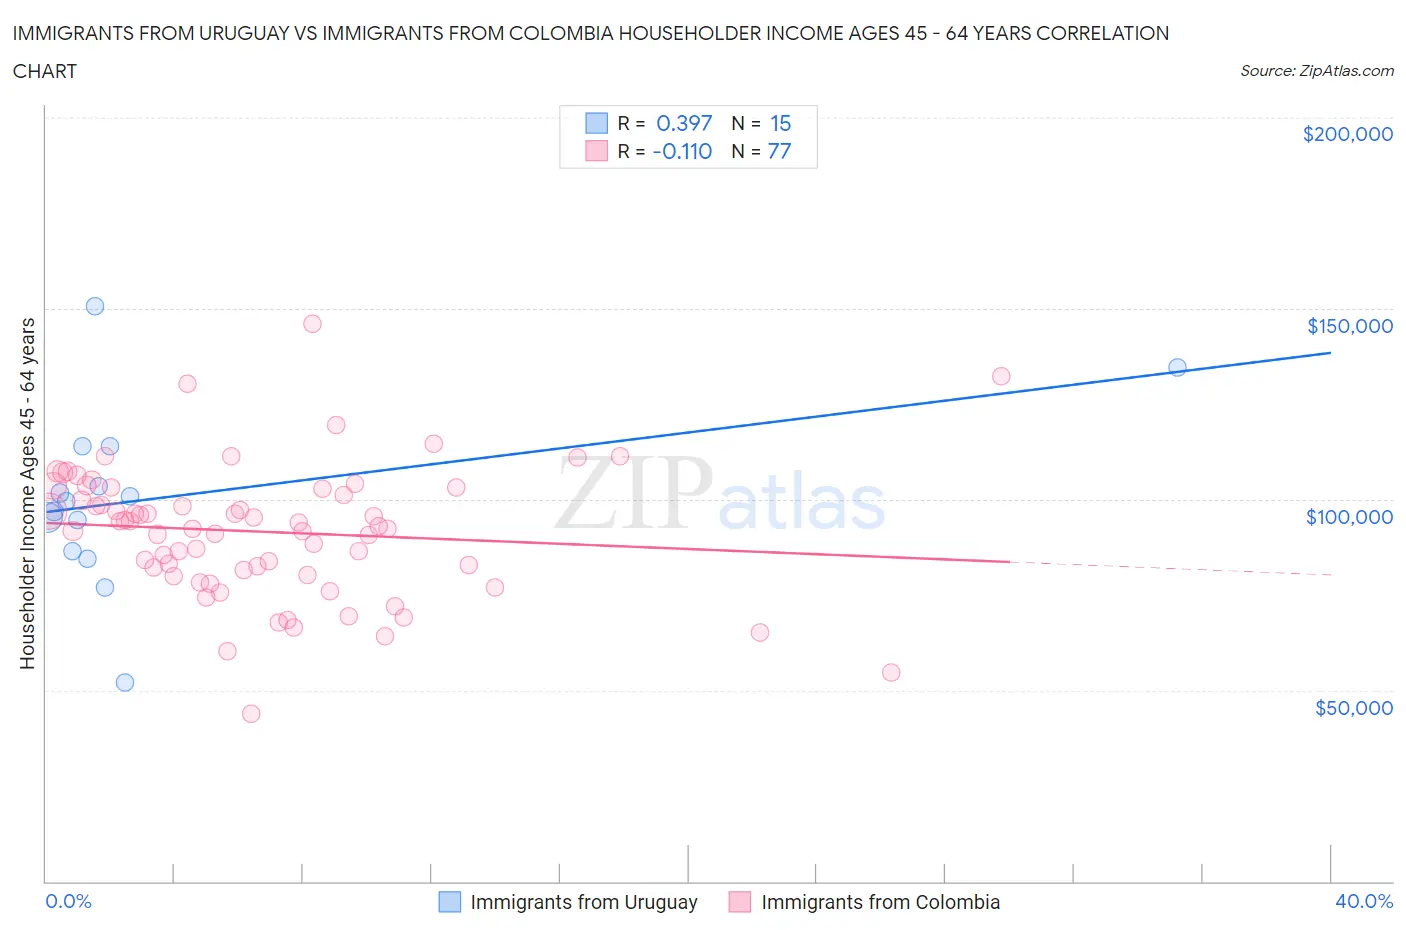 Immigrants from Uruguay vs Immigrants from Colombia Householder Income Ages 45 - 64 years